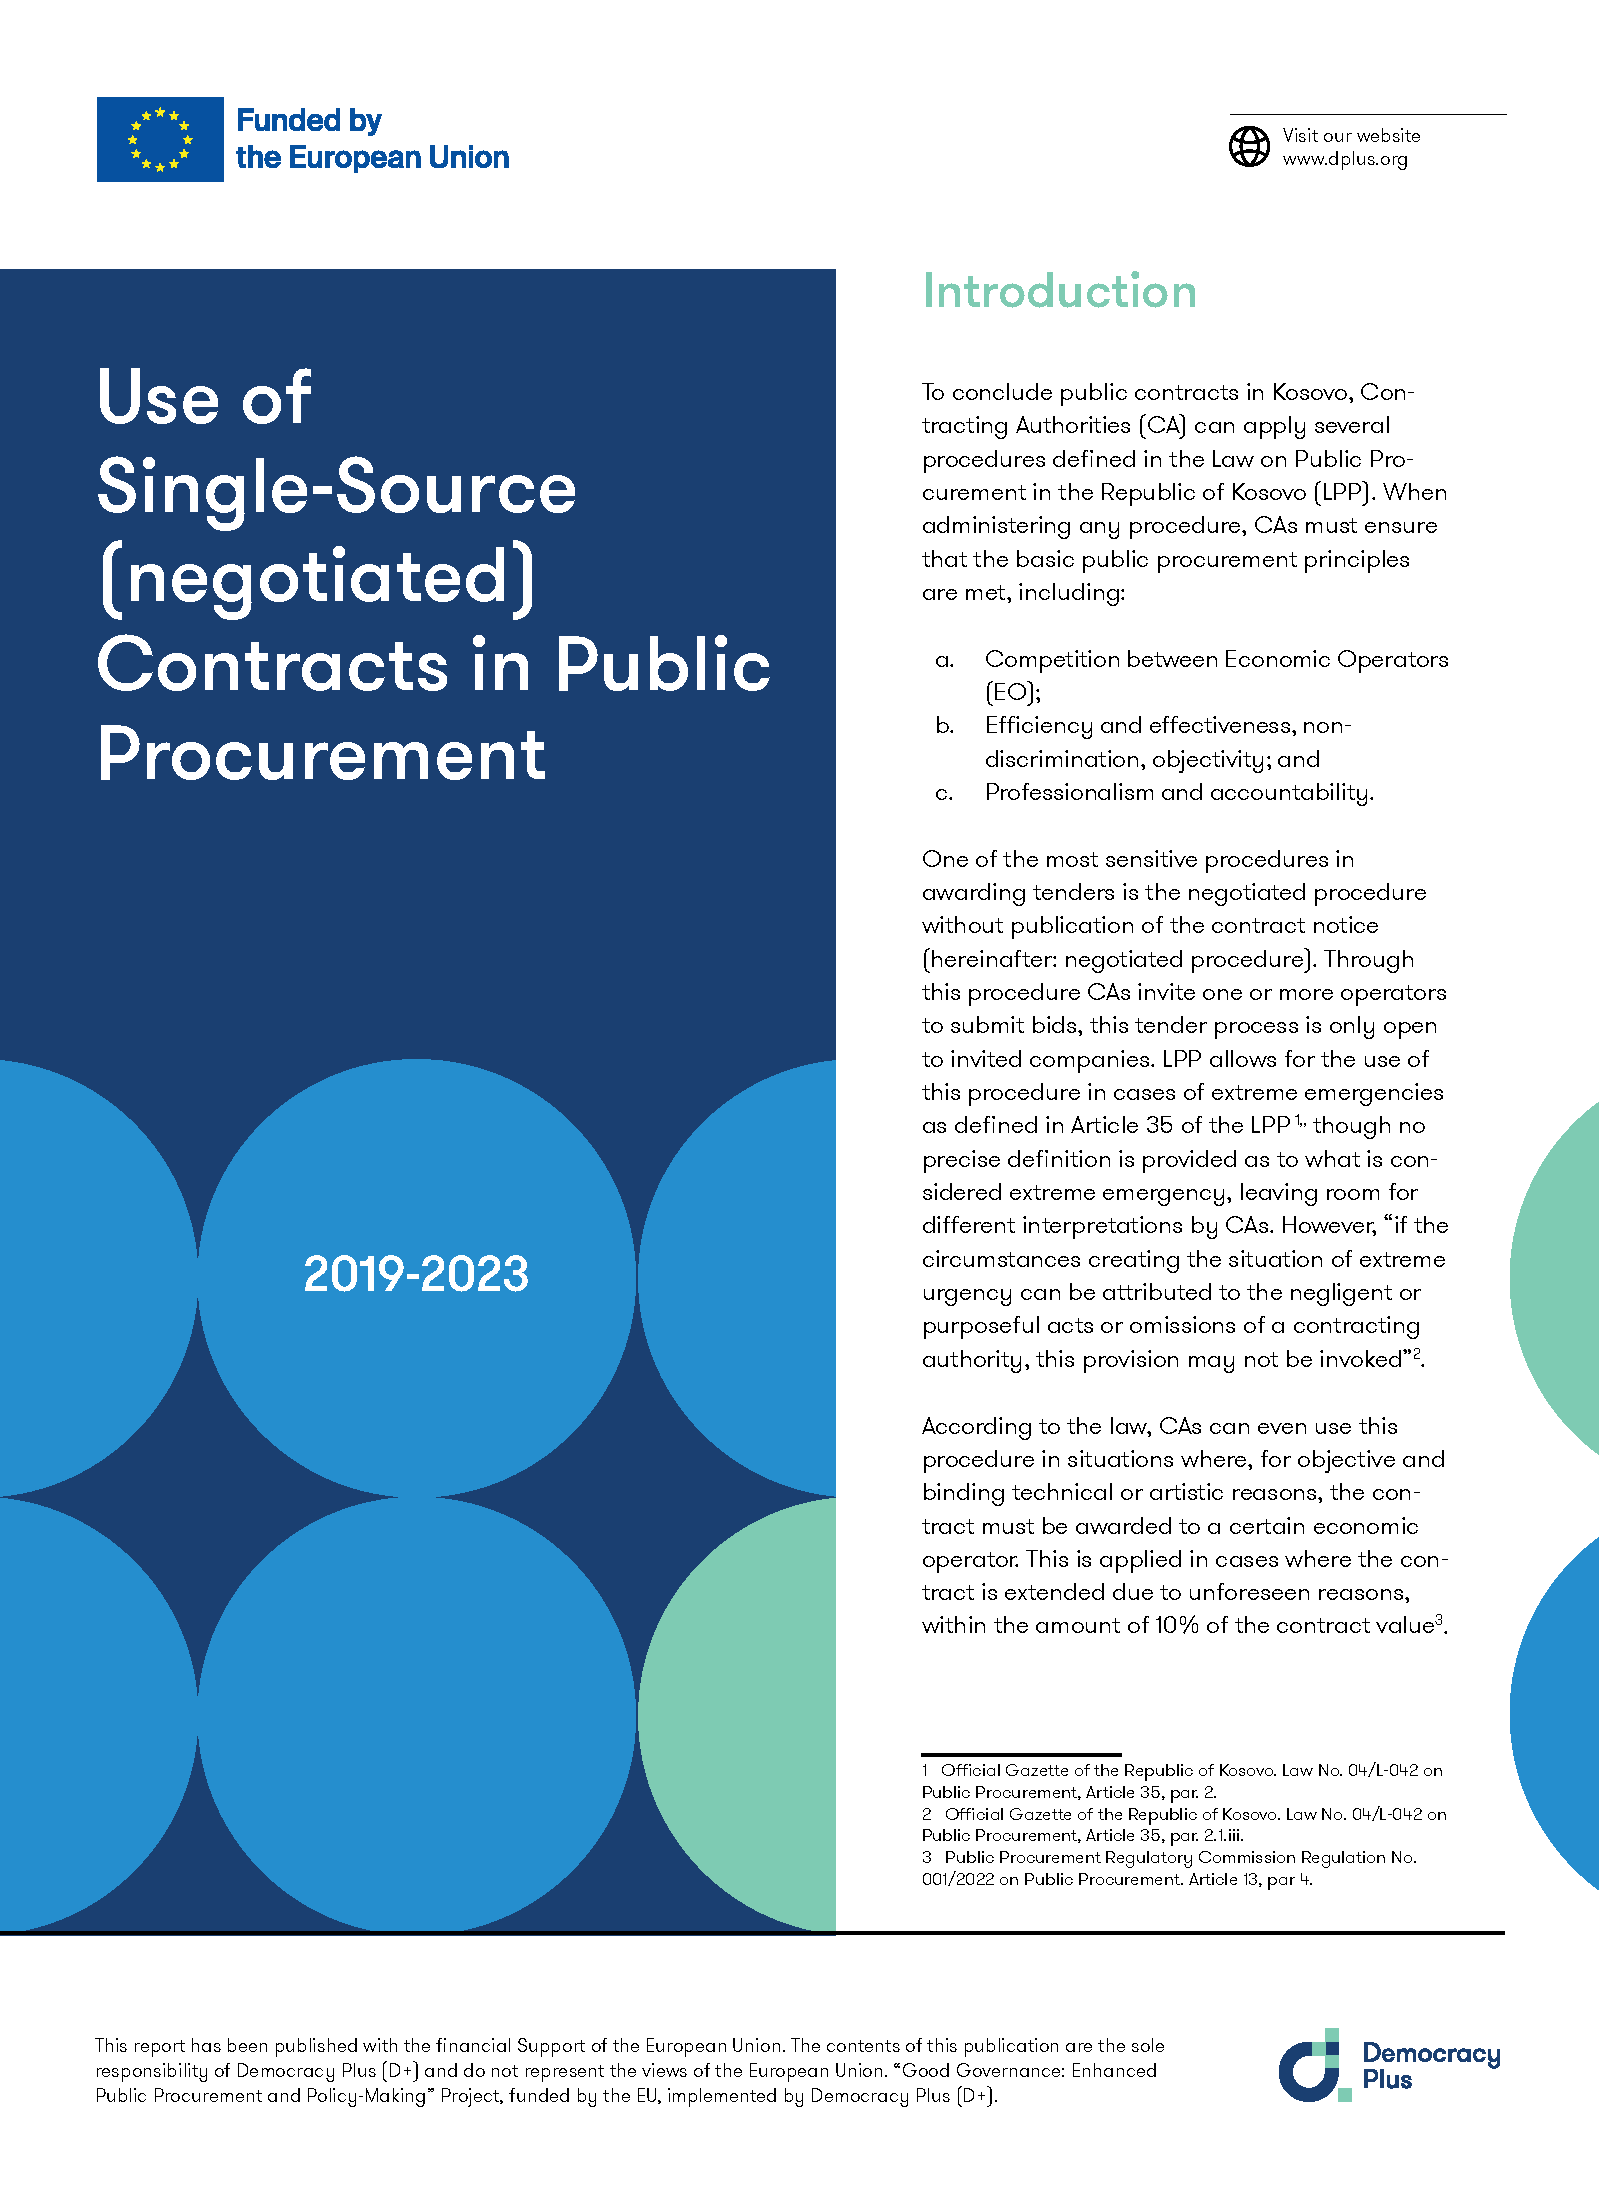 Use of Single-Source (negotiated) Contracts in Public Procurement